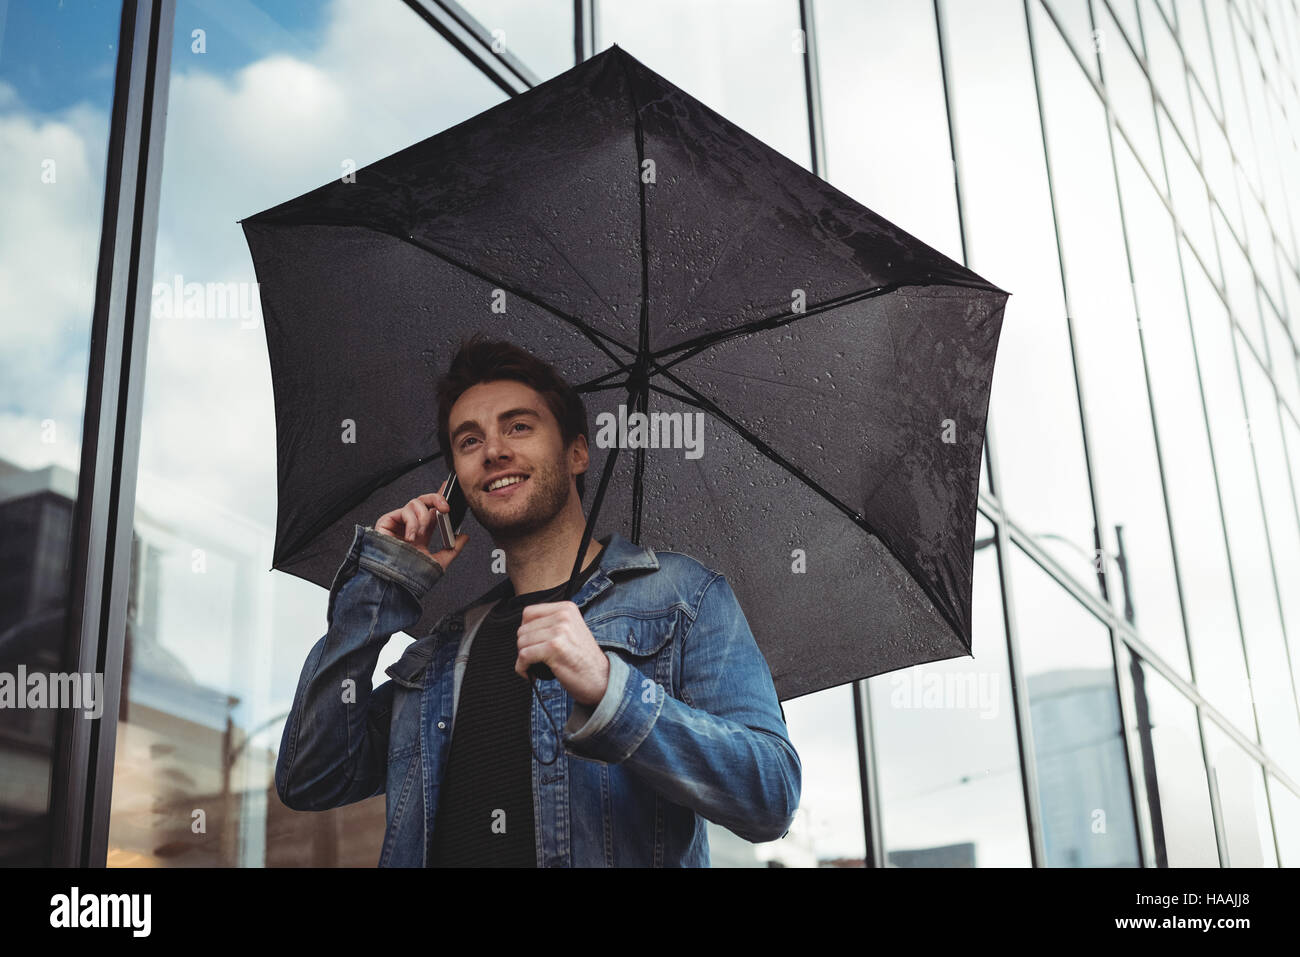 Man holding umbrella and talking on mobile phone Stock Photo